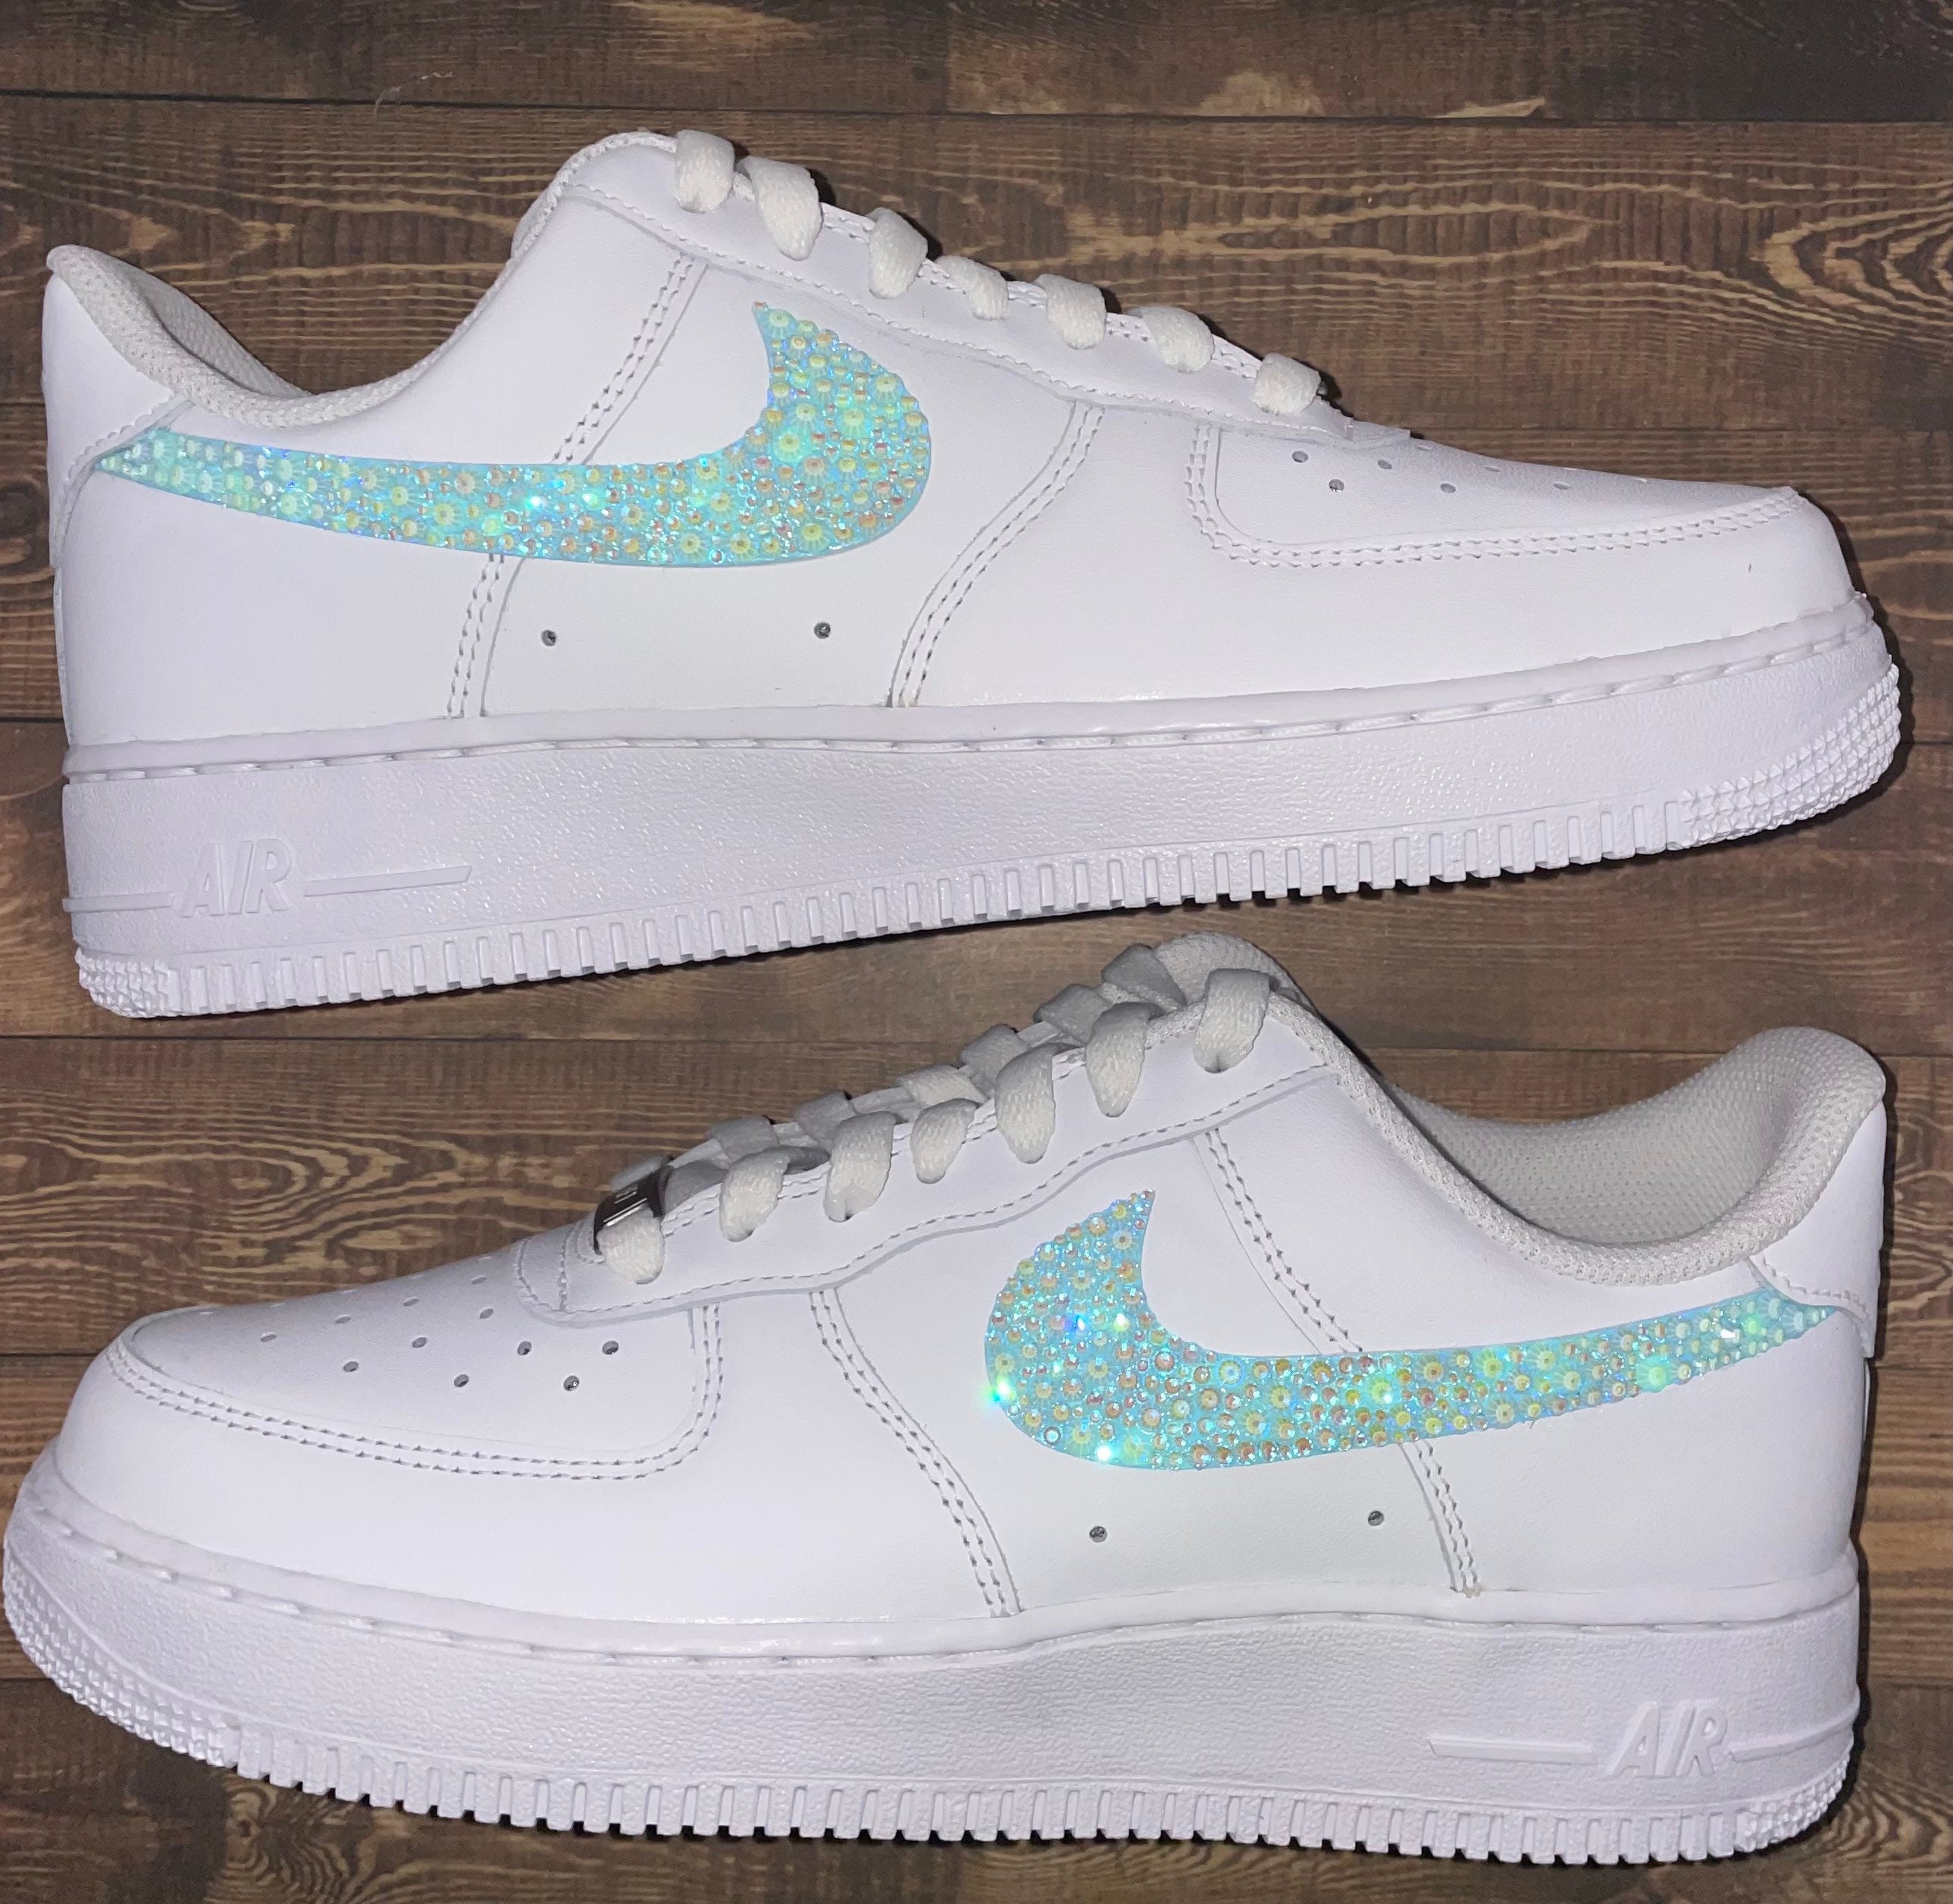 the Dark Nike Air Force 1s Athletic Bling - Etsy